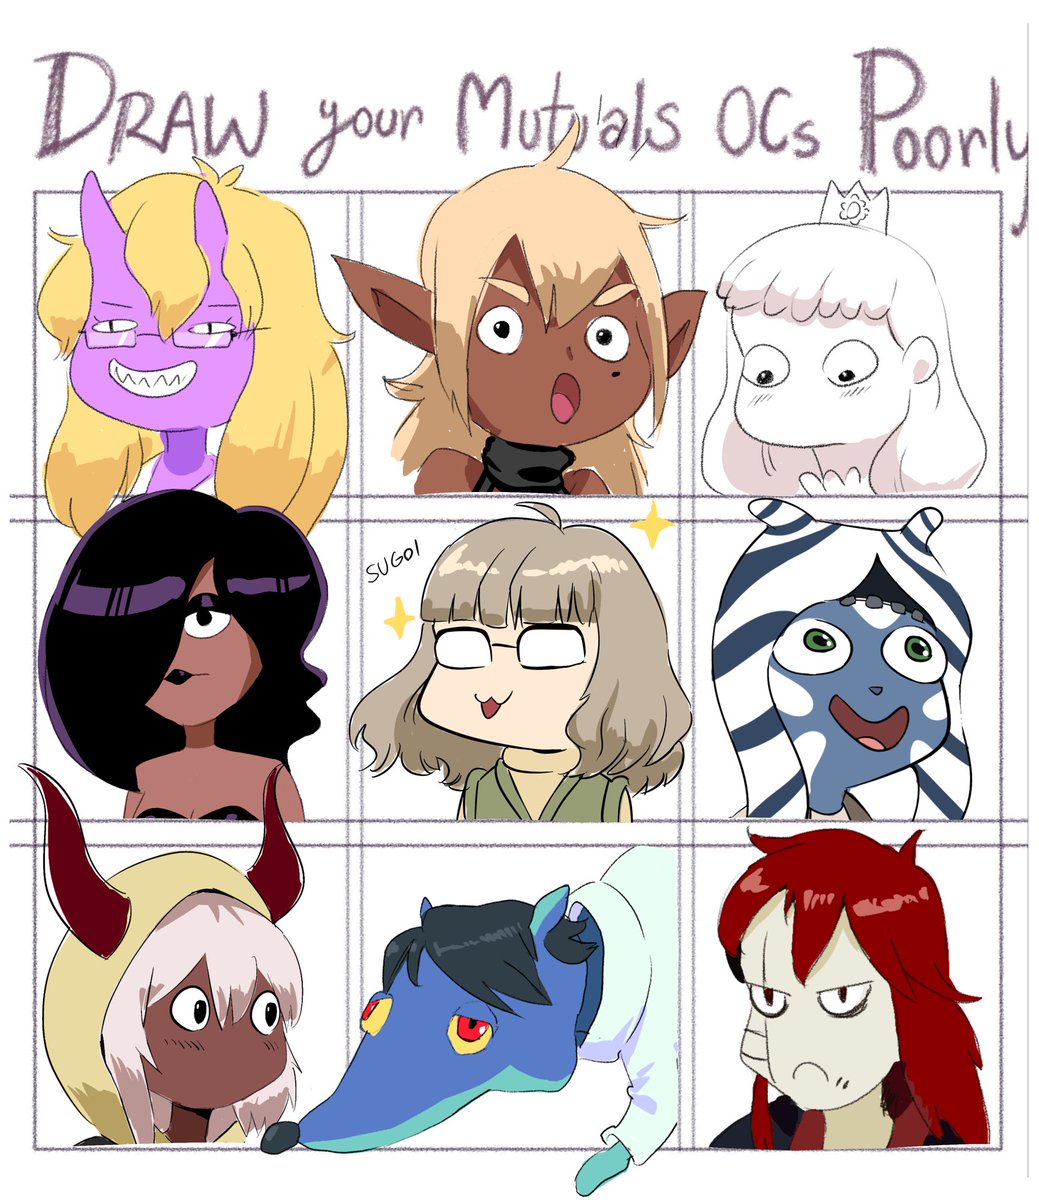 Almost two months later but I finally did the thing

Okappa is there in the middle because I was only given 8 OCs 